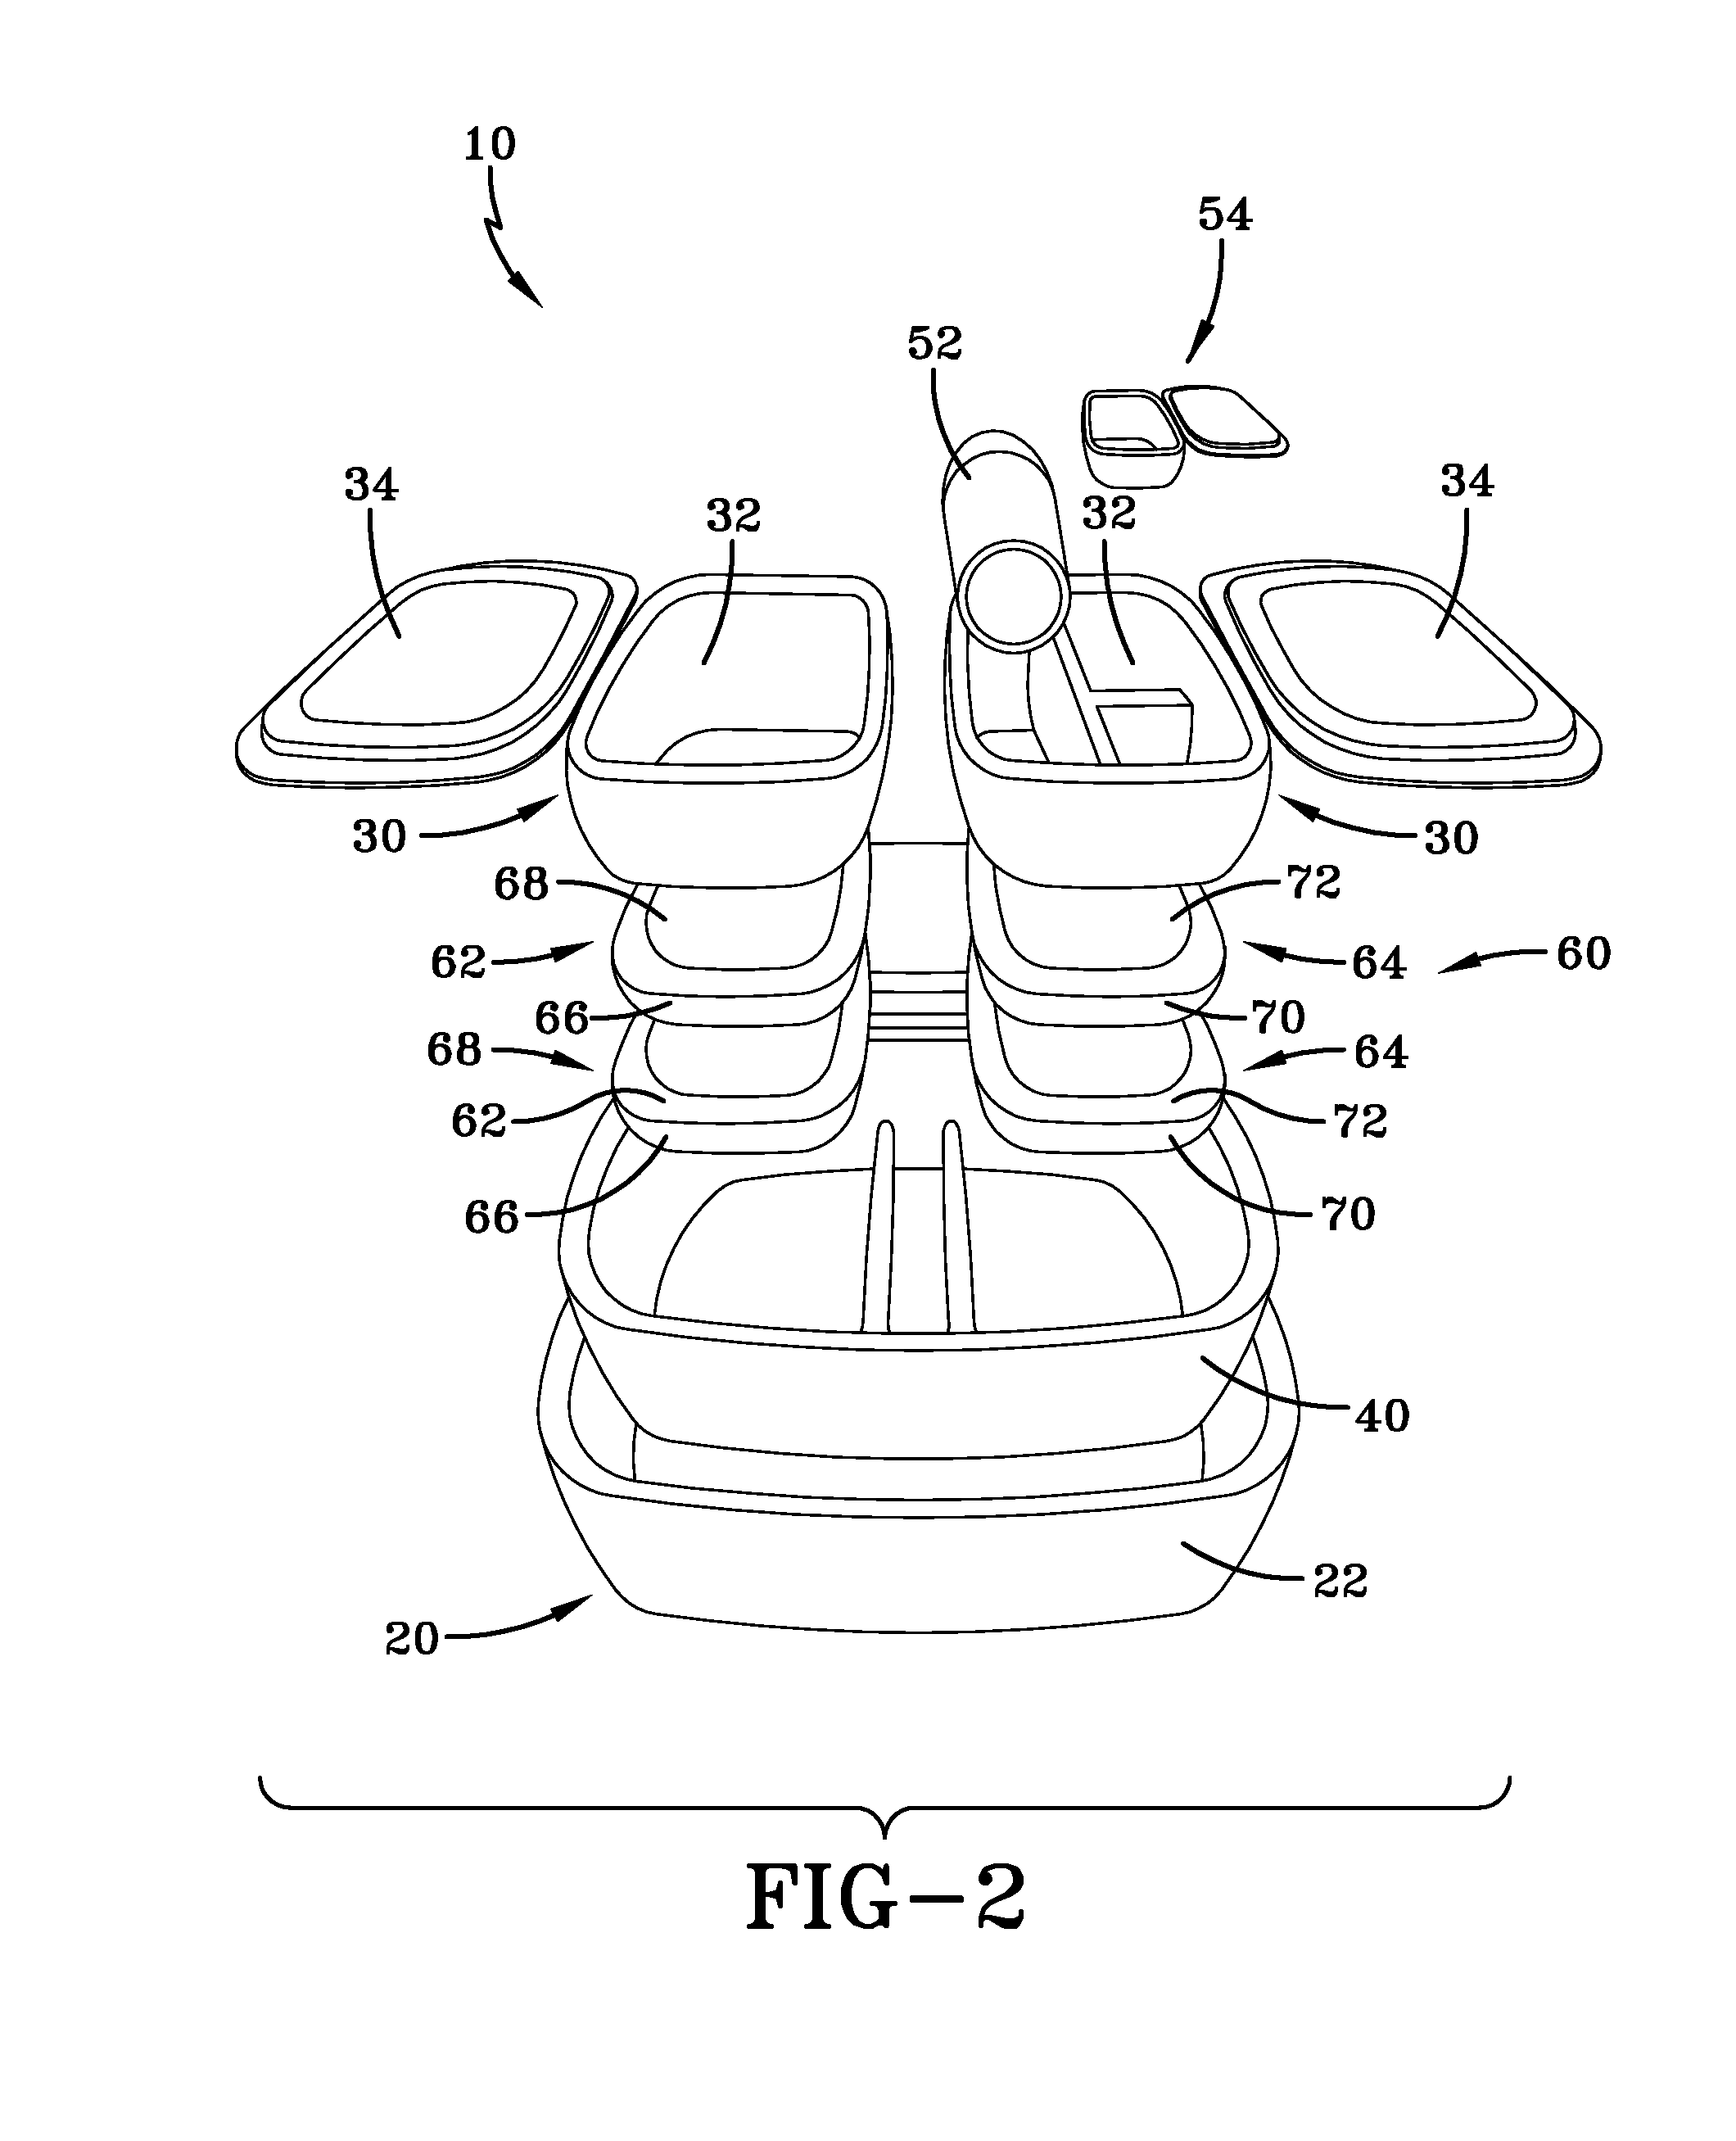 Device providing hot and cold storage and transport for food and the like